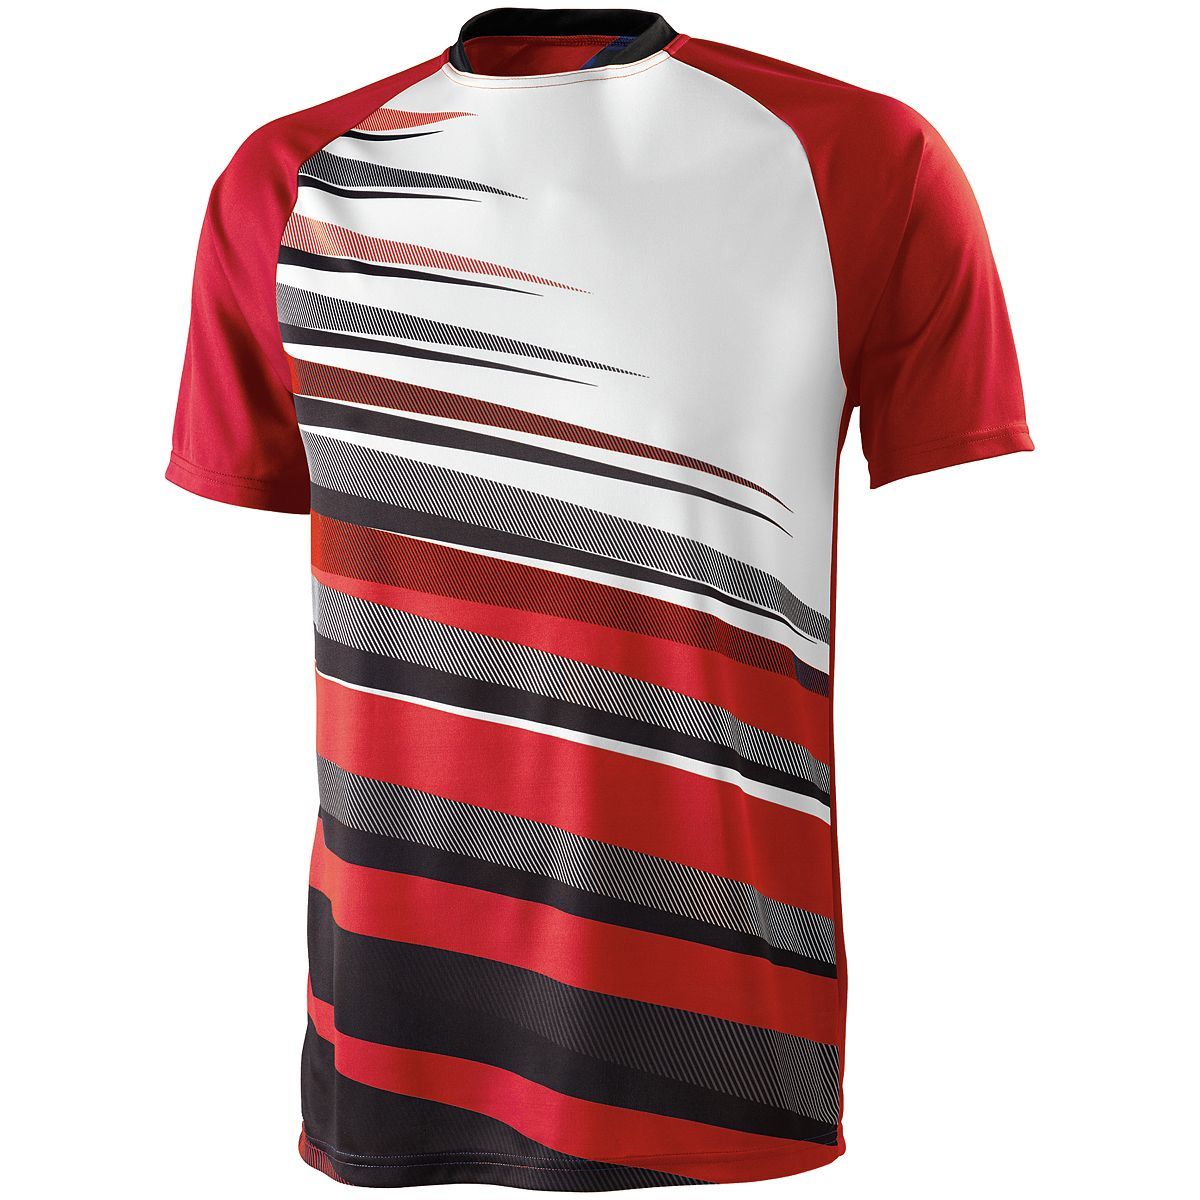 High 5 Youth Galactic Jersey in Scarlet/Black/White  -Part of the Youth, Youth-Jersey, High5-Products, Soccer, Shirts, All-Sports-1 product lines at KanaleyCreations.com